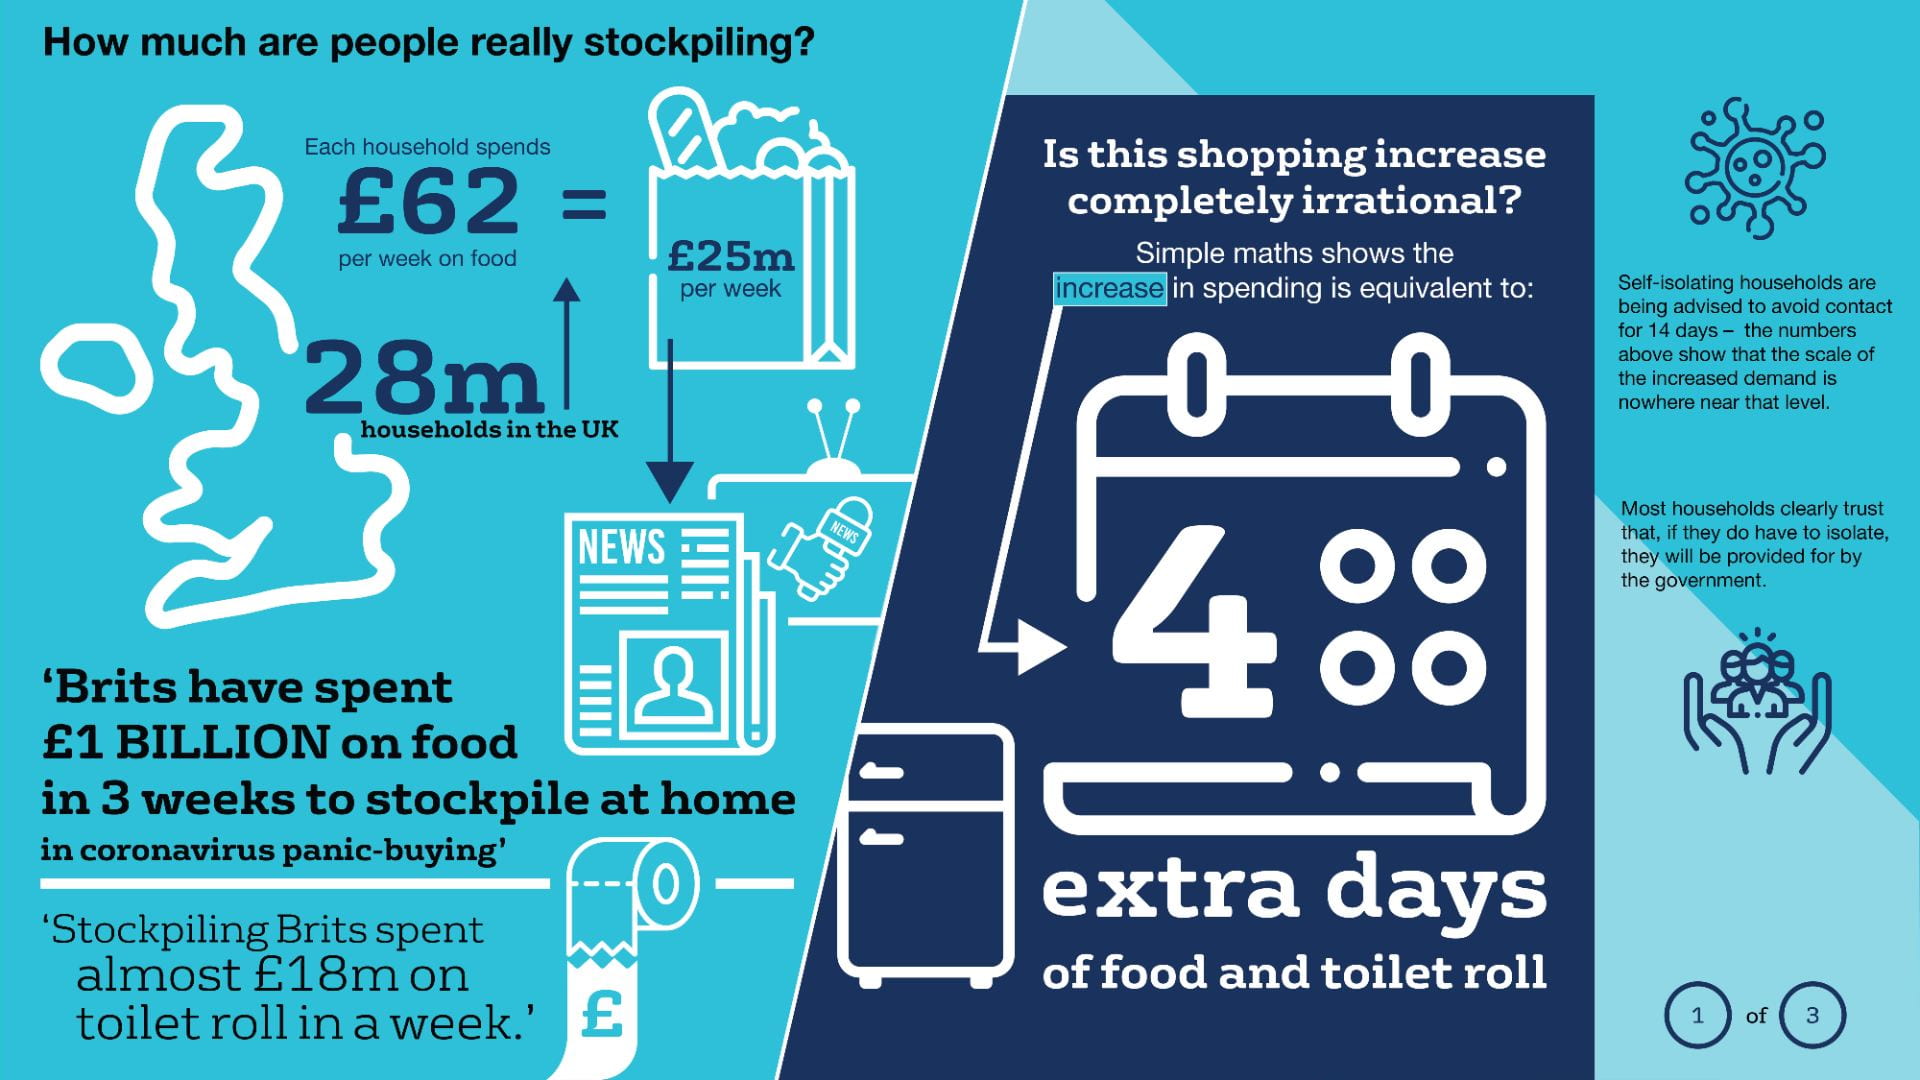 How much are people really stockpiling?